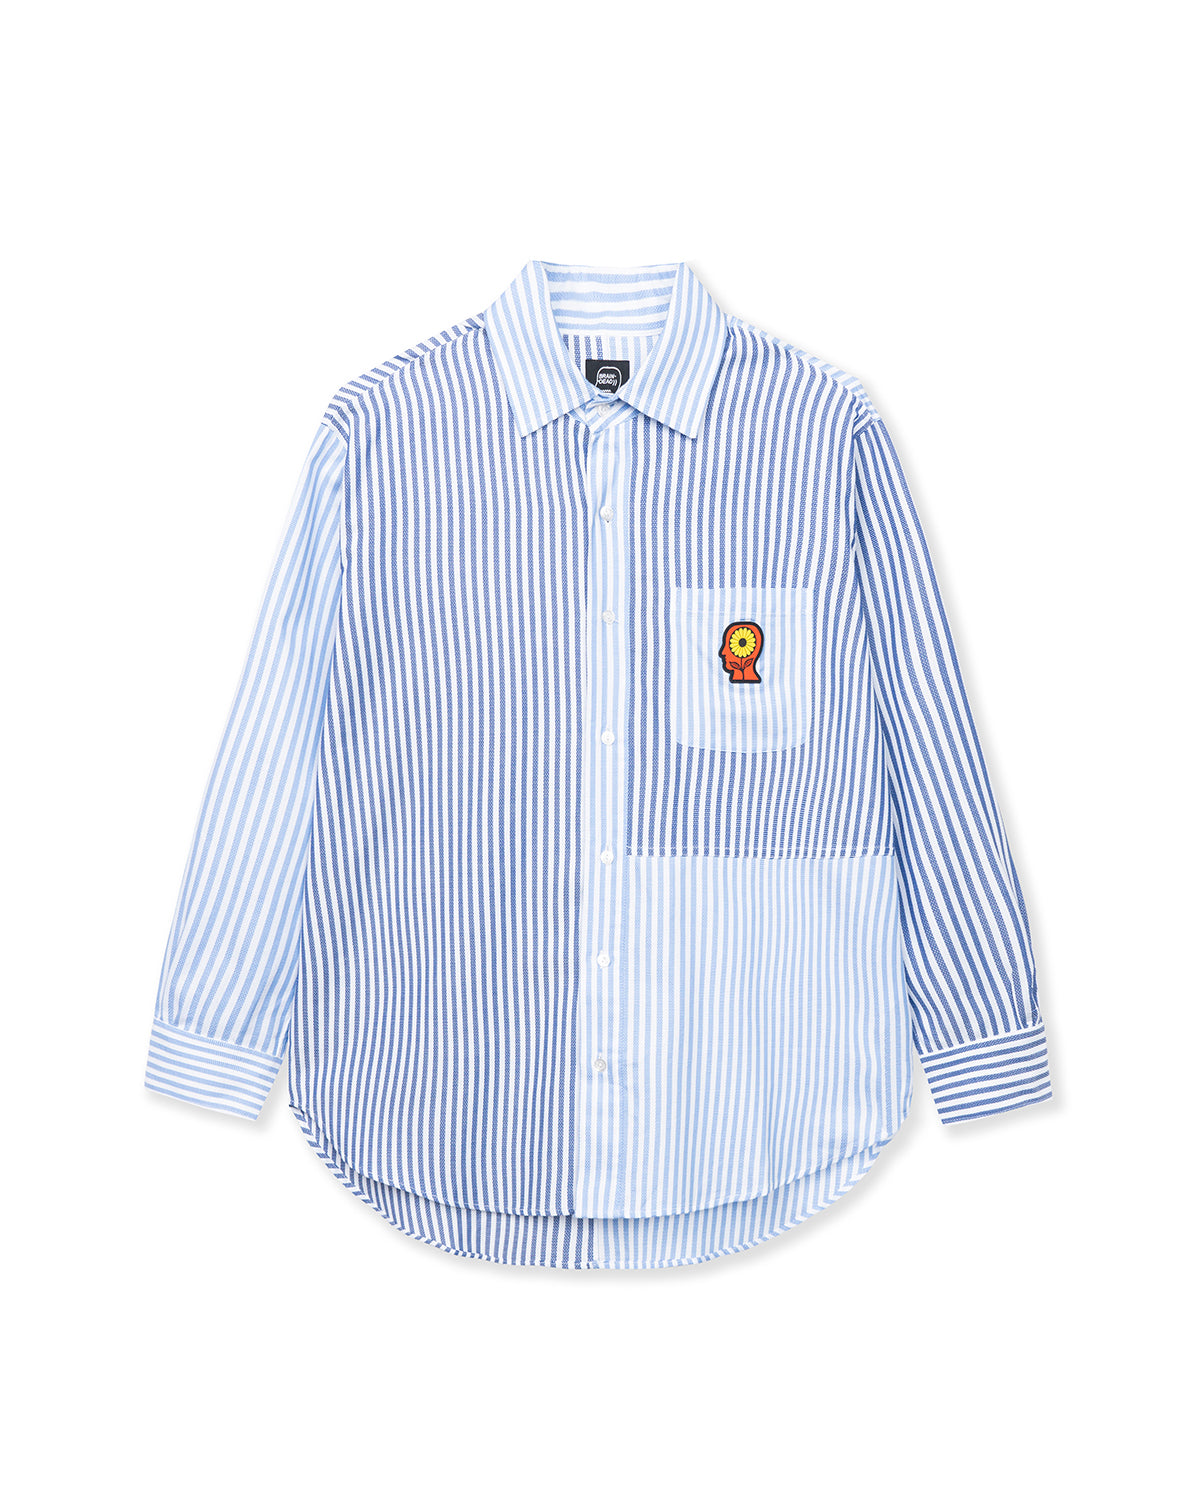 Sunflower Paneled Oxford Button Up Shirting - Blue / white商品名